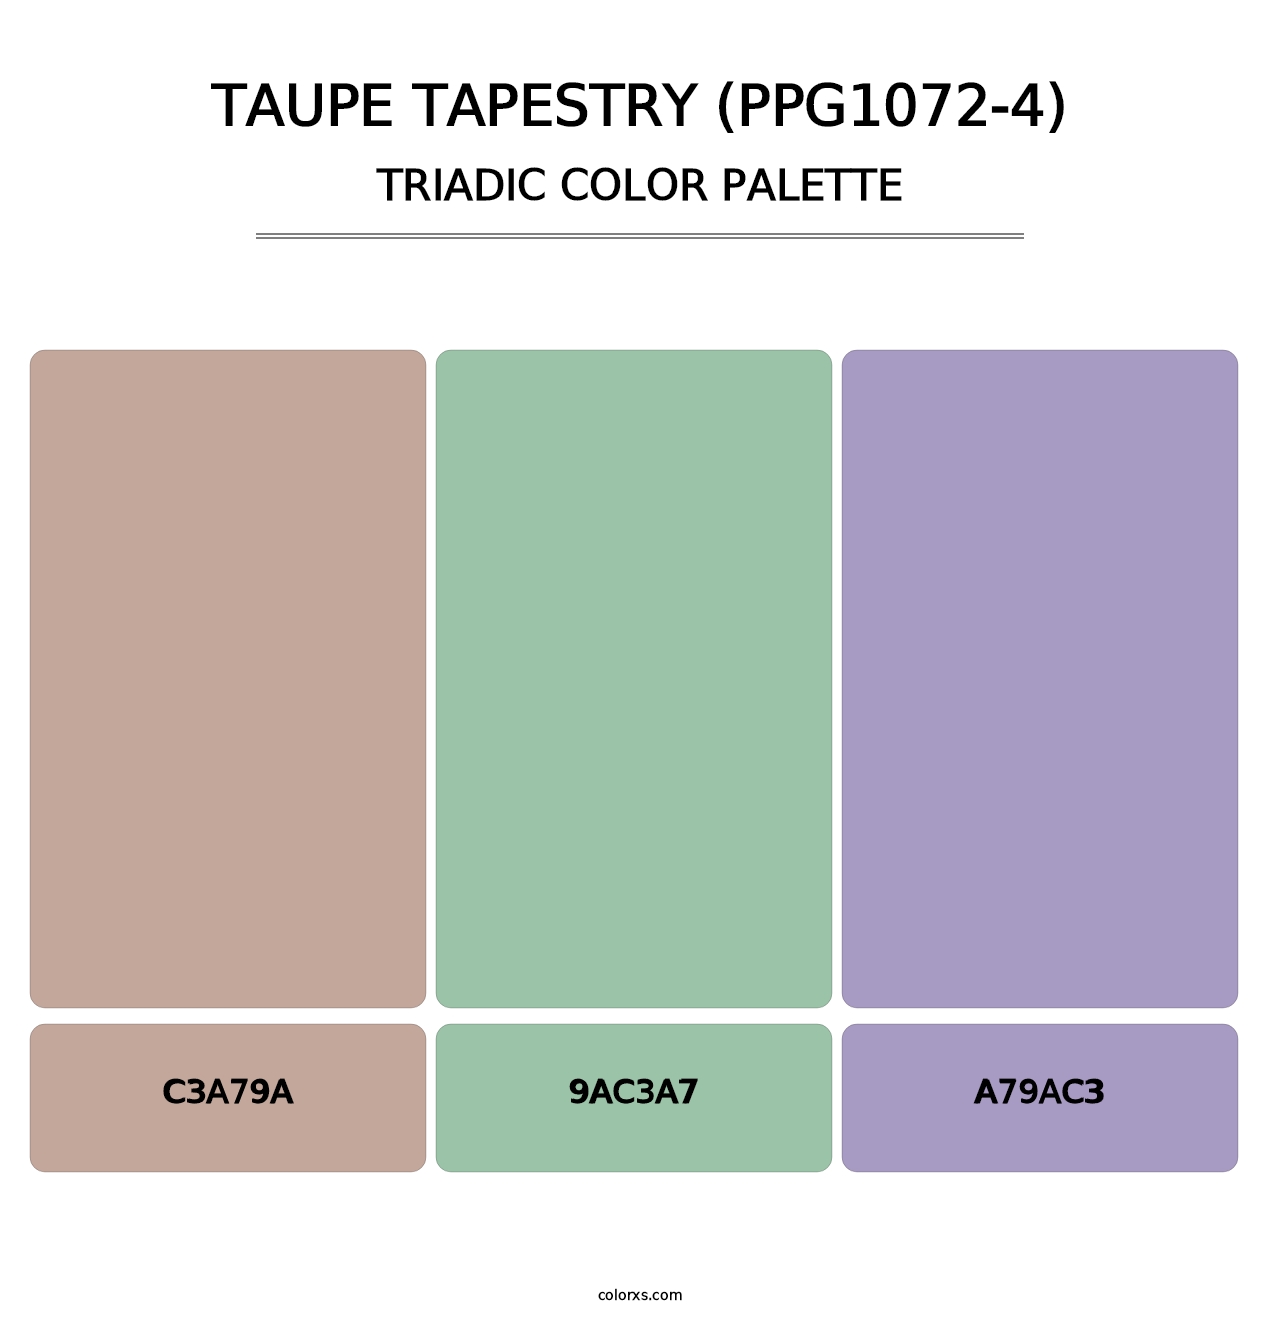 Taupe Tapestry (PPG1072-4) - Triadic Color Palette